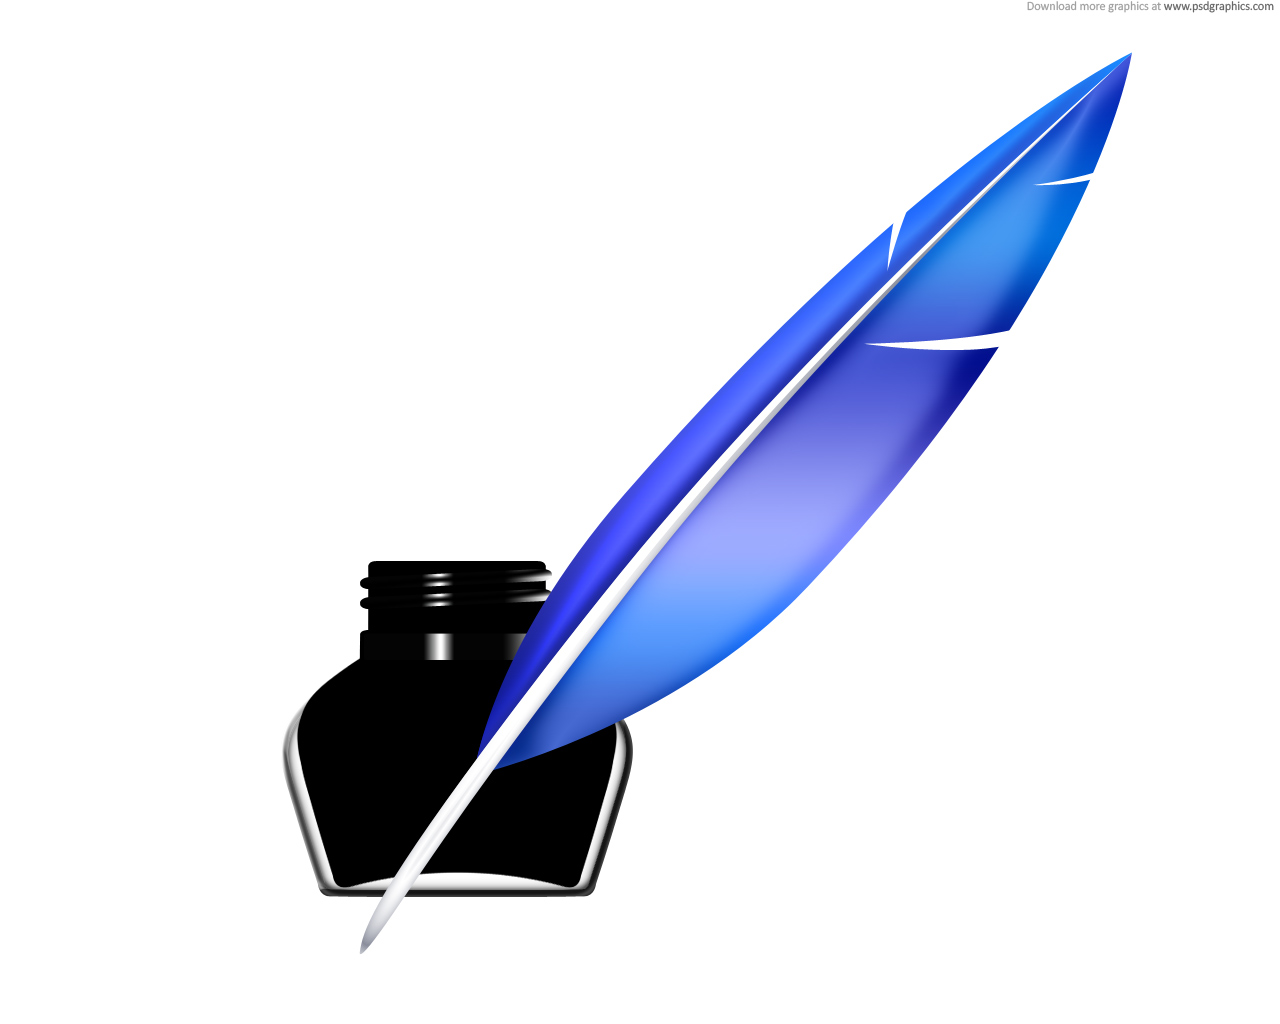 27 Pictures Of Quill Pens Free Cliparts That You Can Download To You